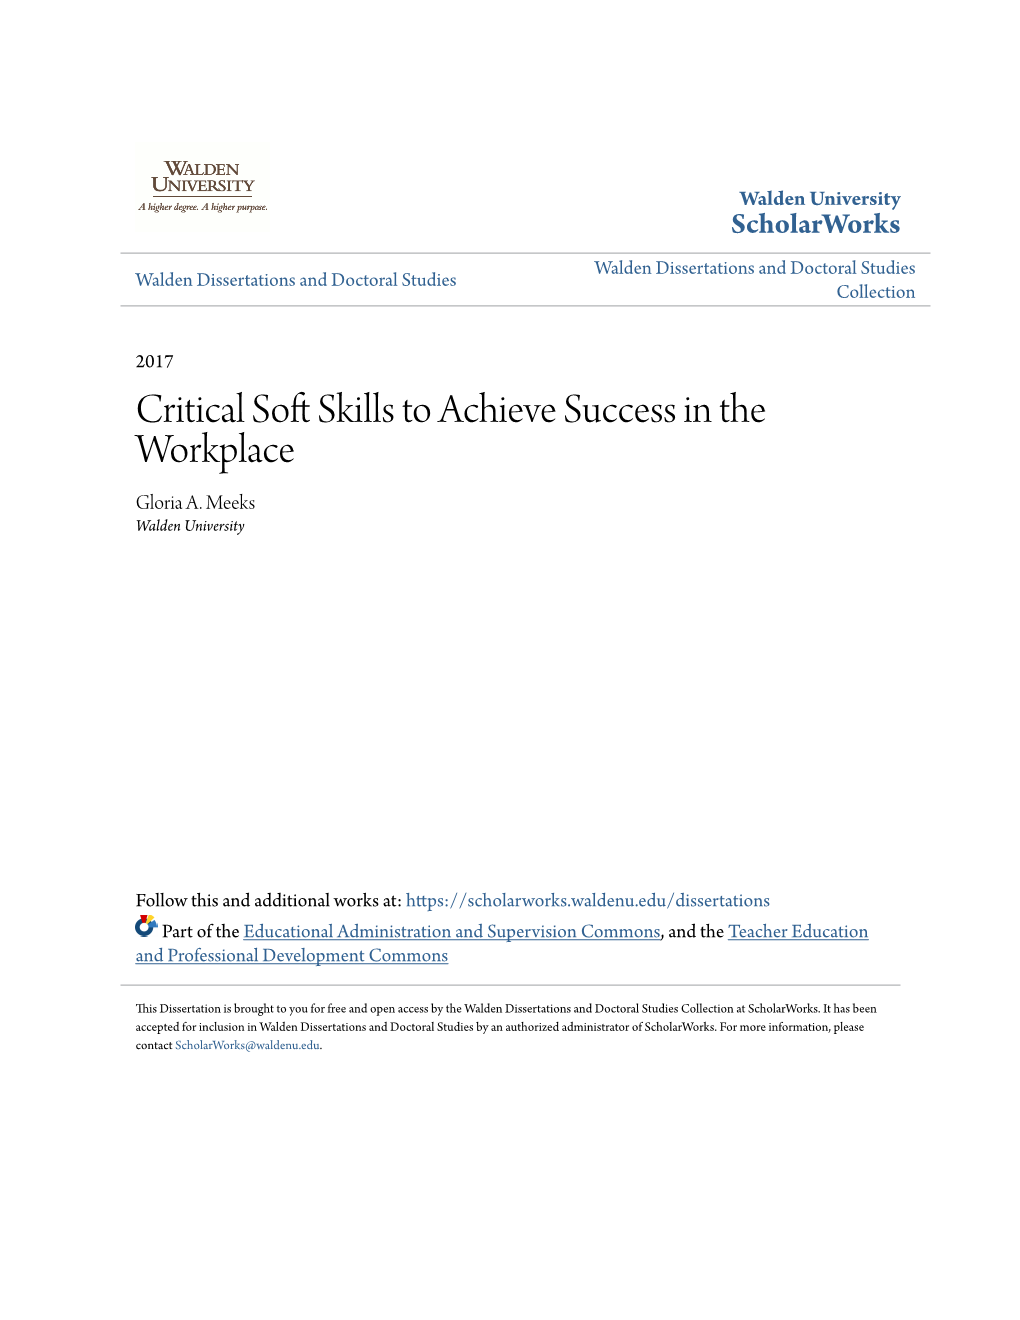 Critical Soft Skills to Achieve Success in the Workplace